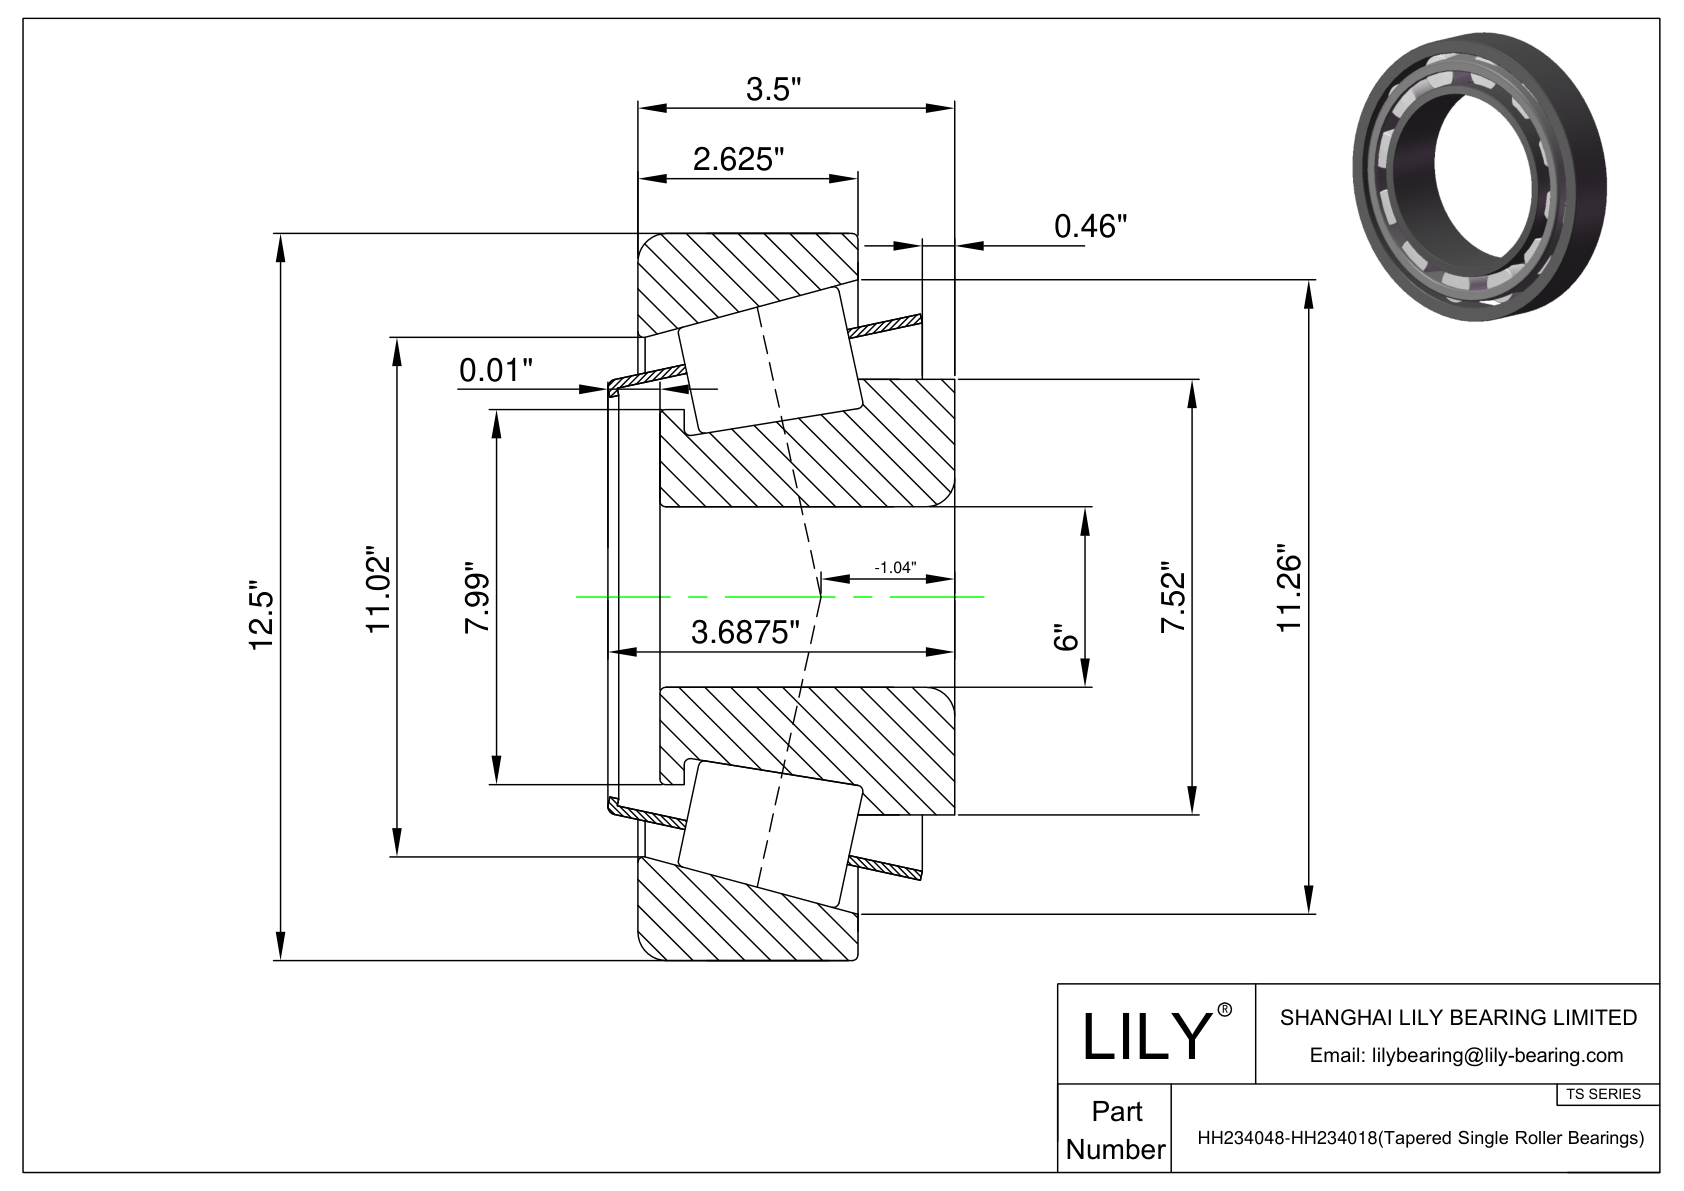 HH234048-HH234018 TS (Tapered Single Roller Bearings) (Imperial) cad drawing